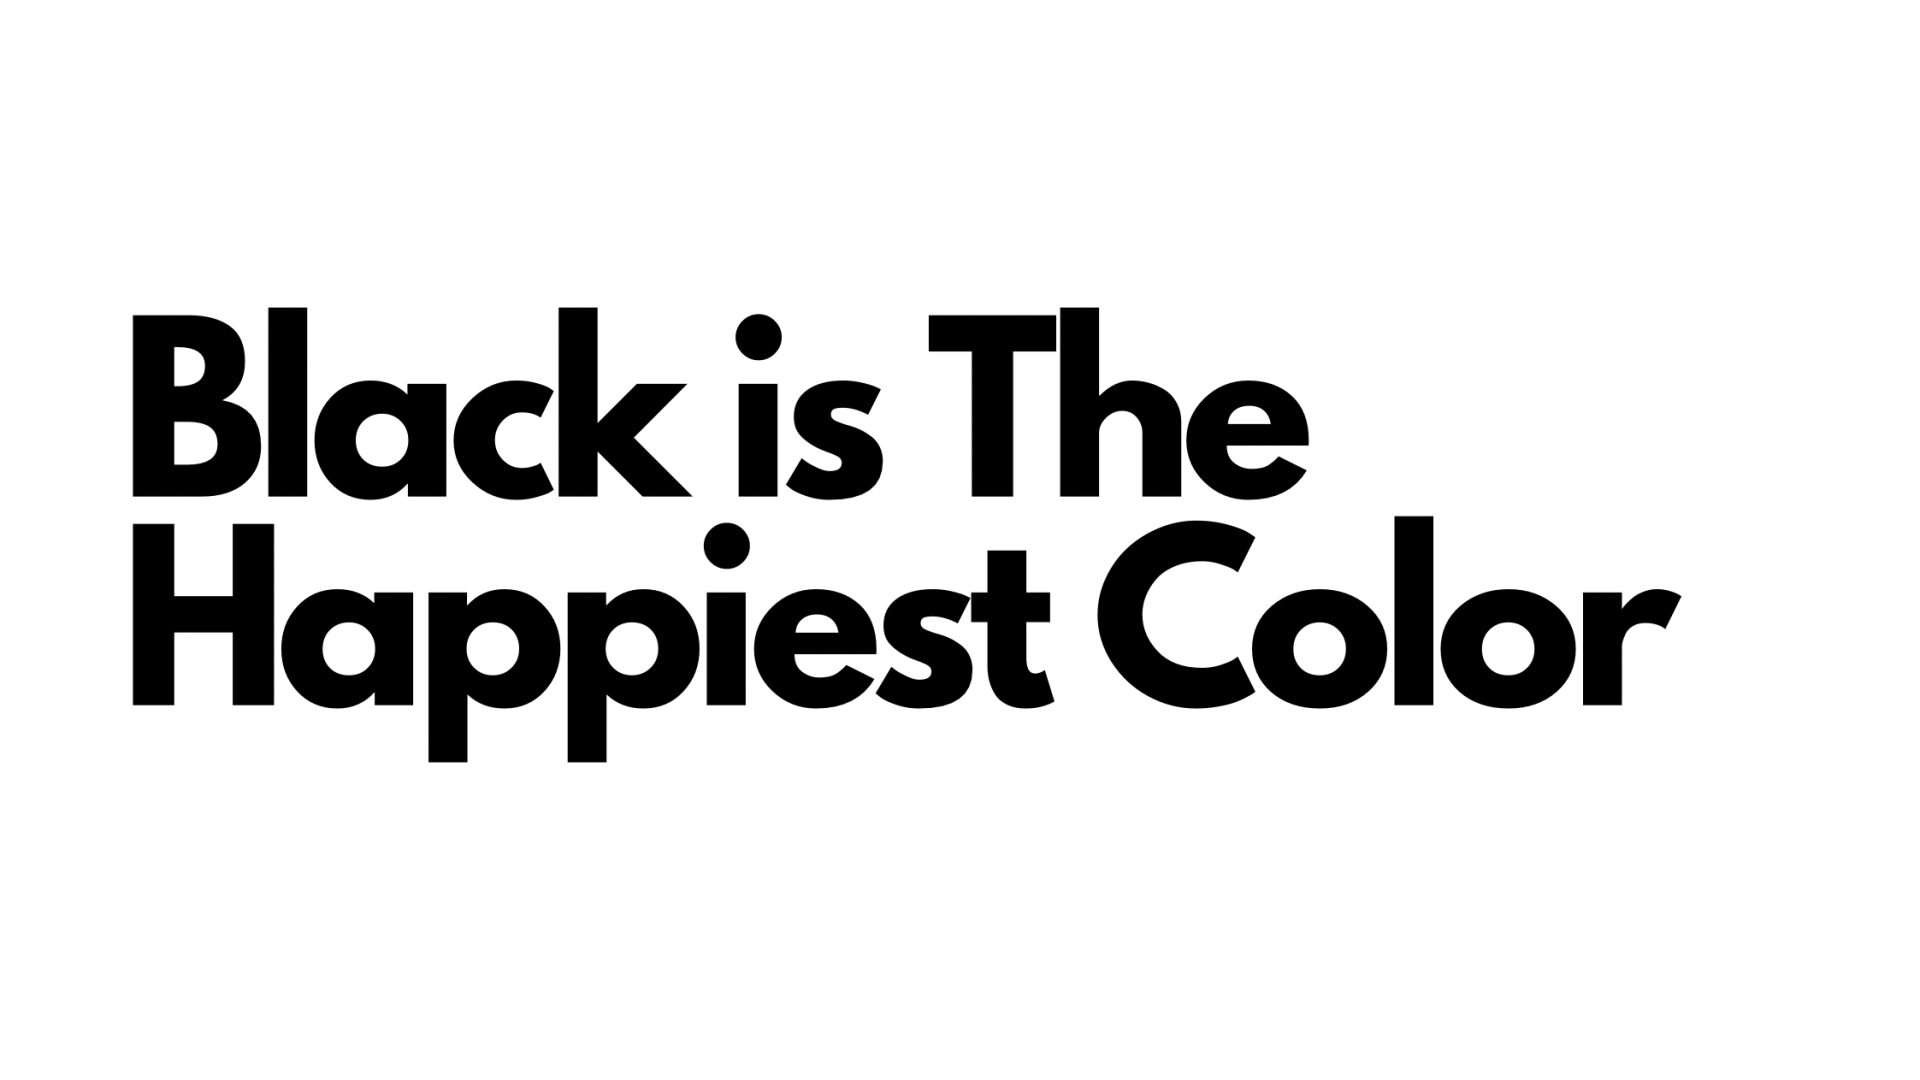 Black is The Happiest Color